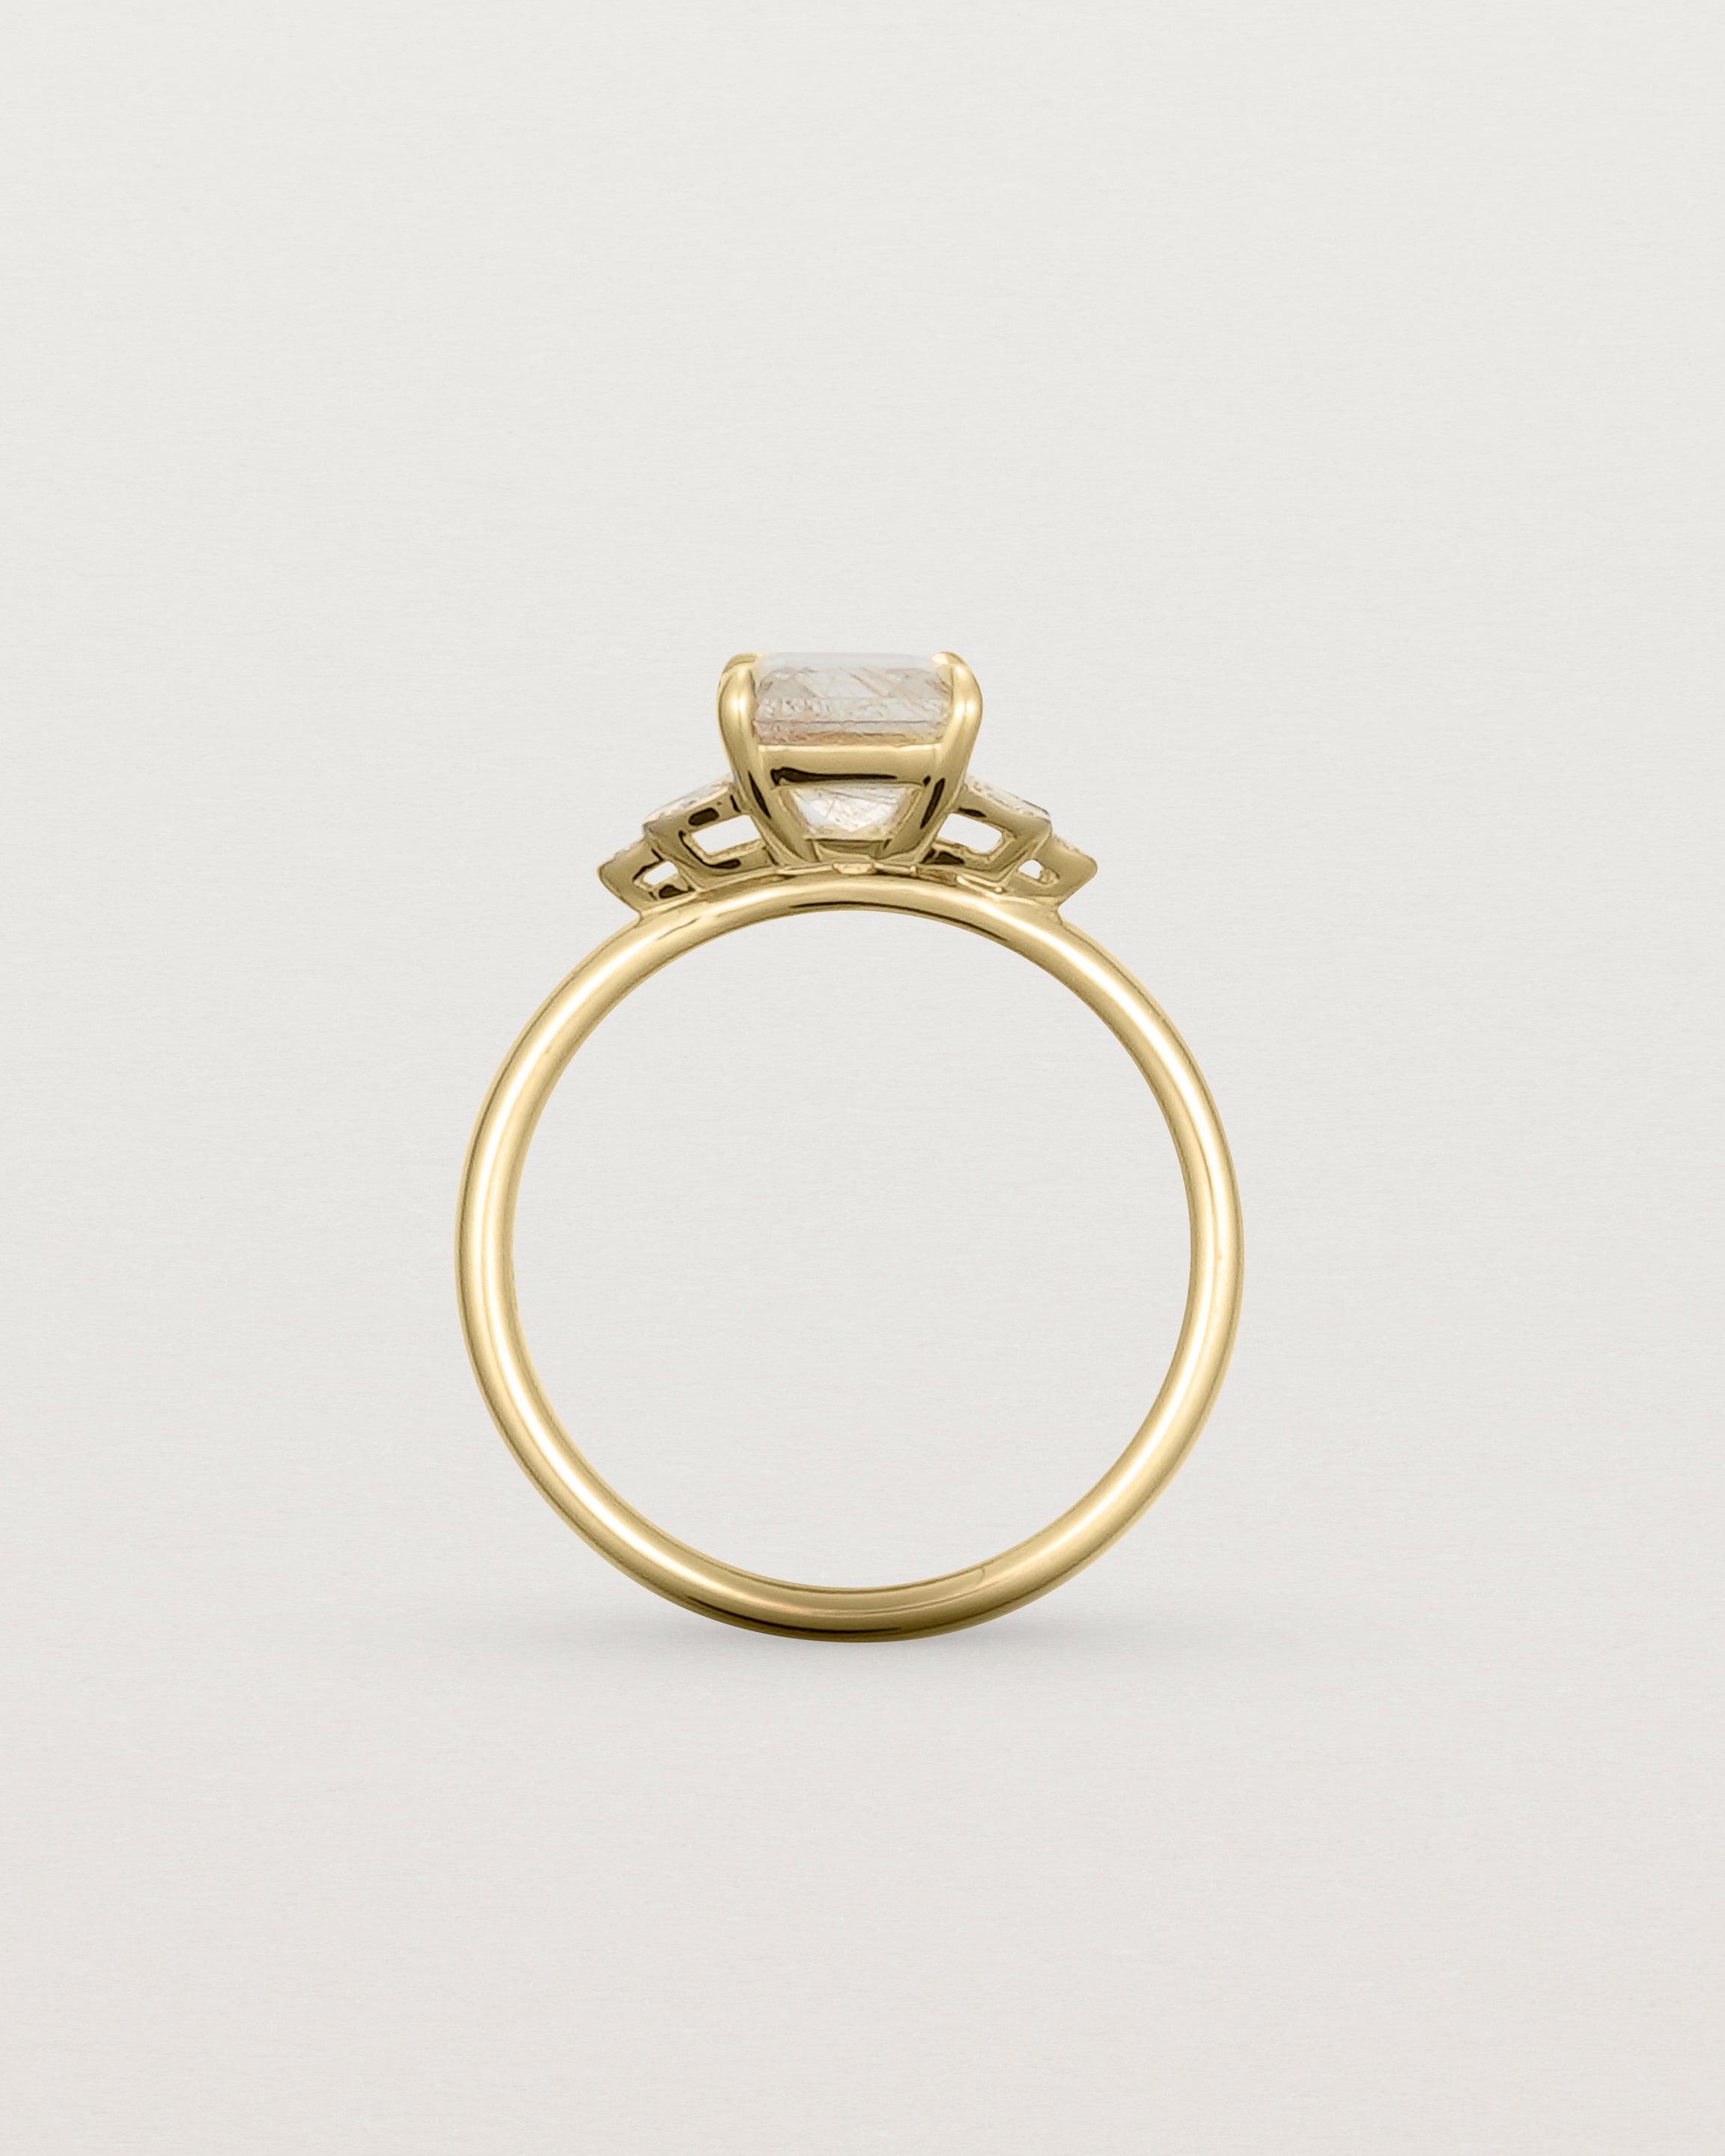 Standing view of Posie Ring with rutilated quartz in yellow gold